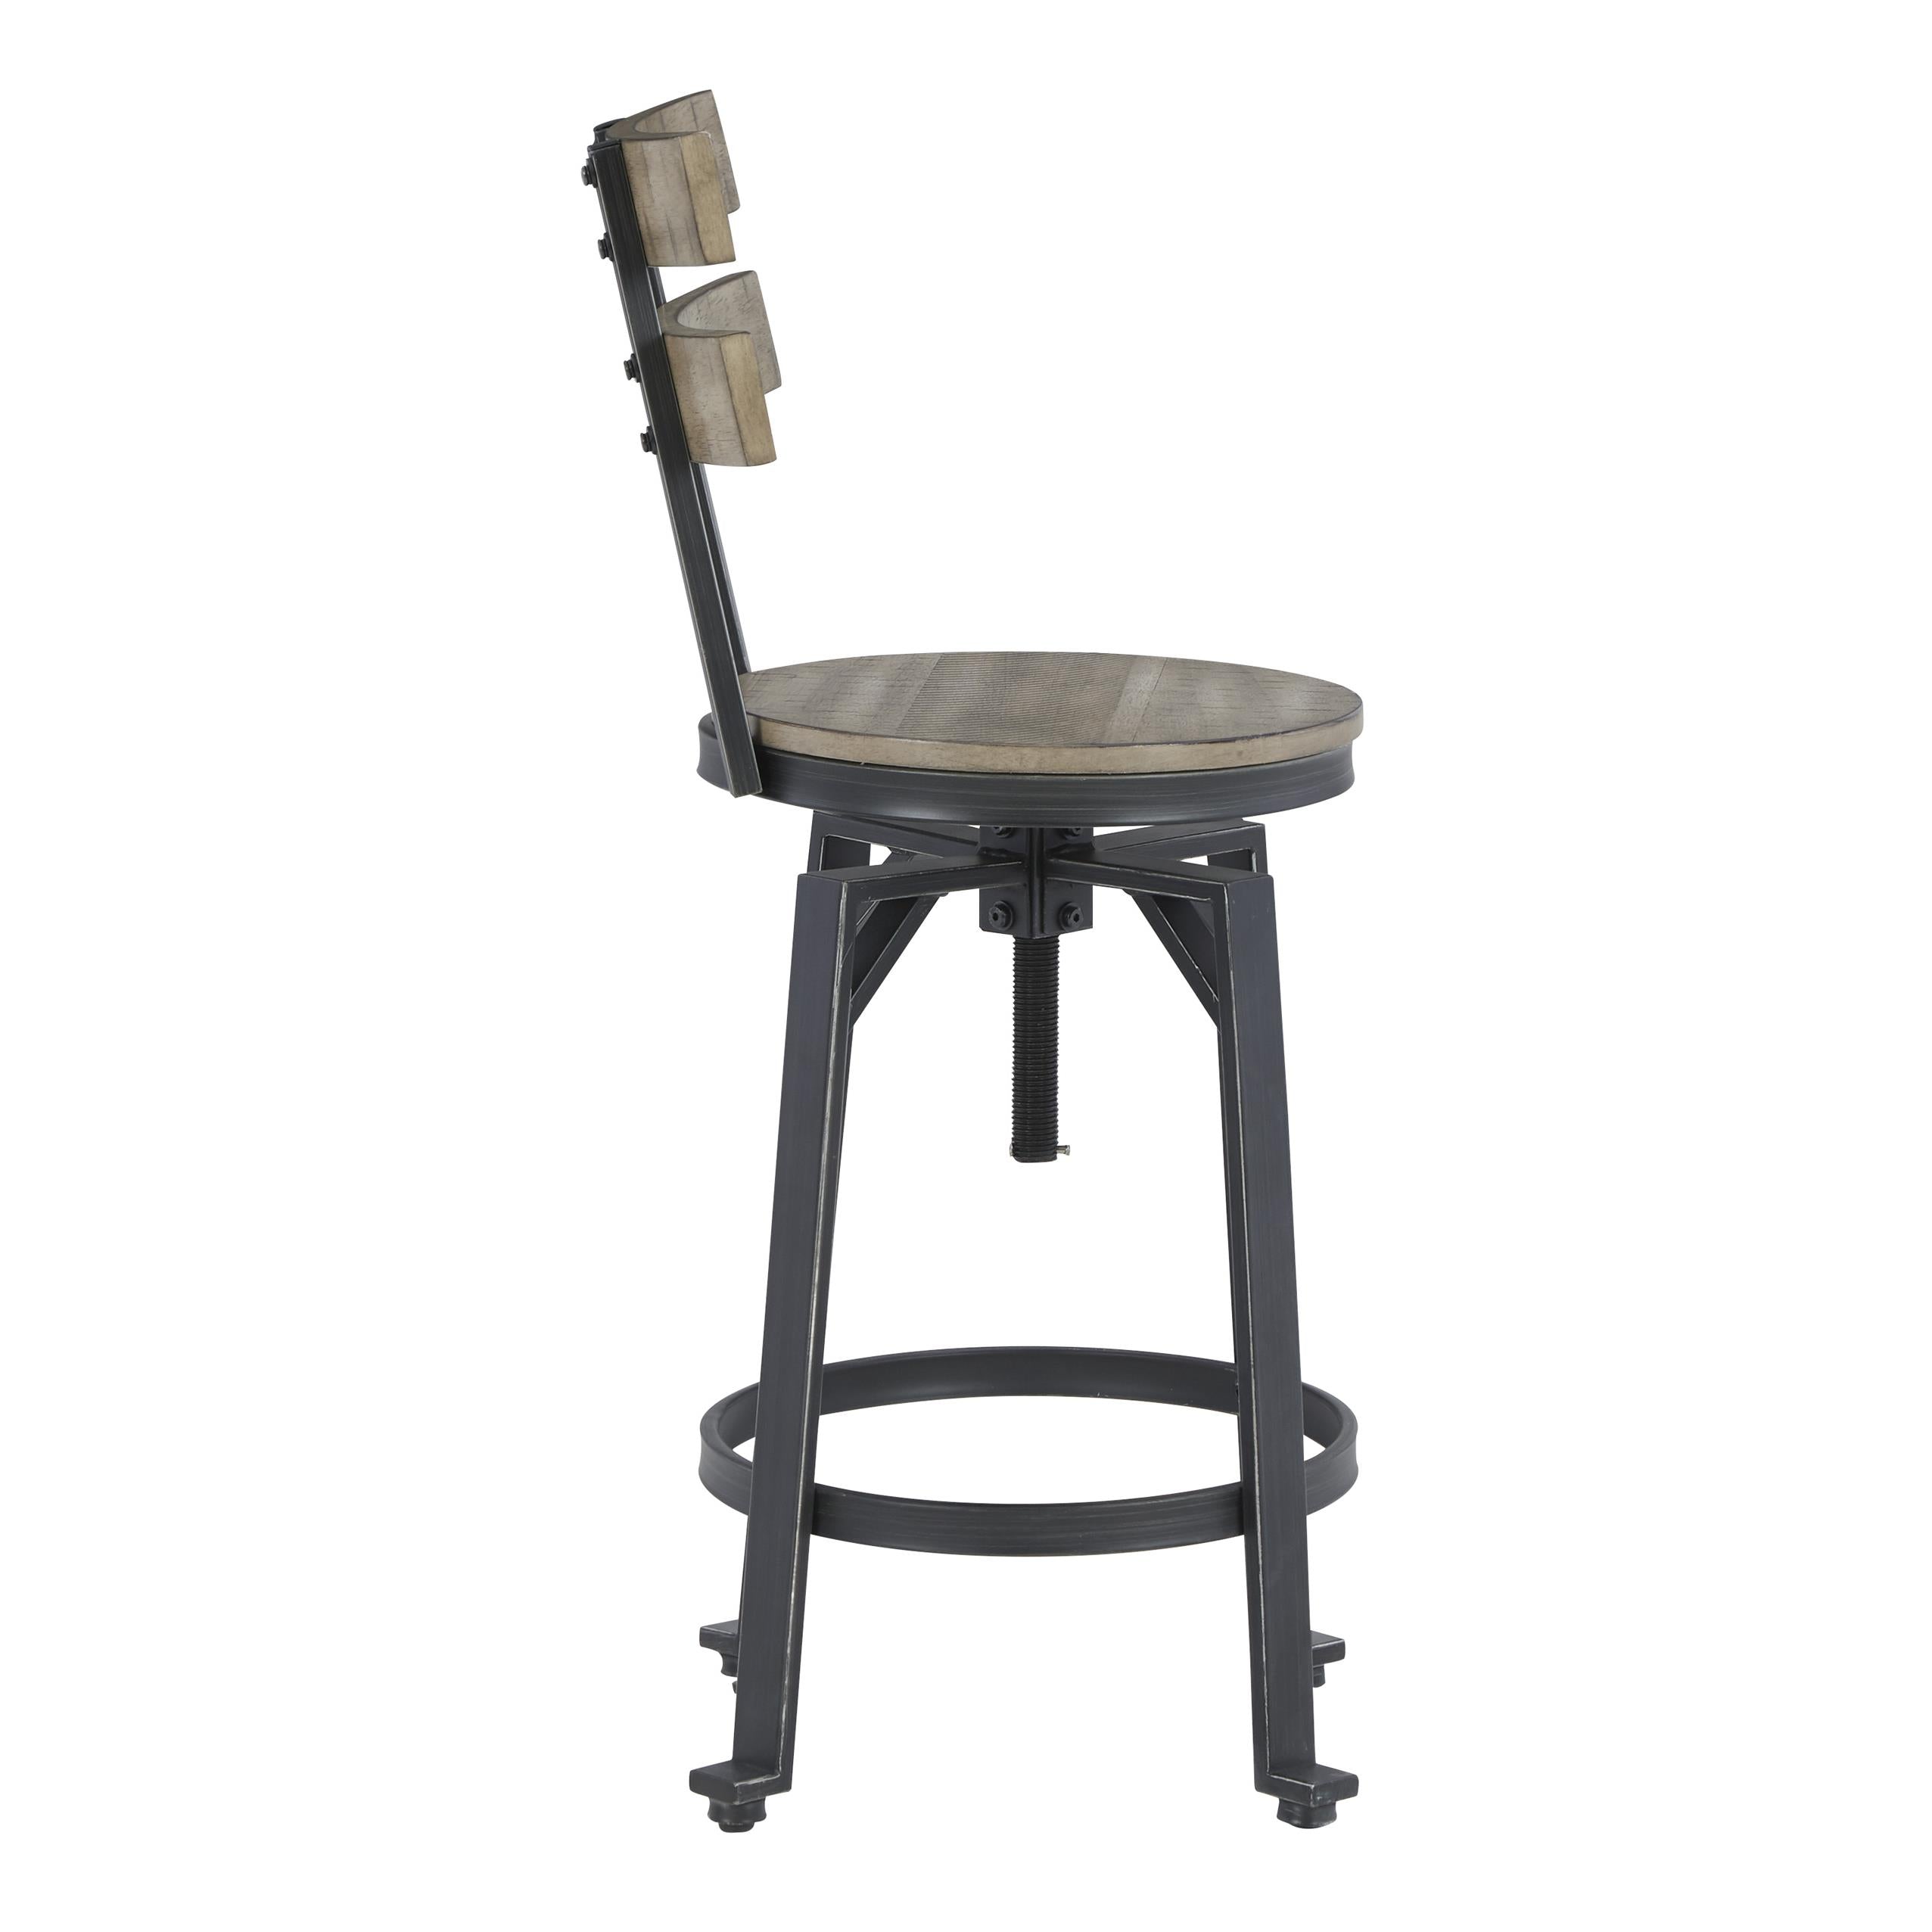 Signature Design by Ashley Lesterton Adjustable Height Stool D334-124 IMAGE 3